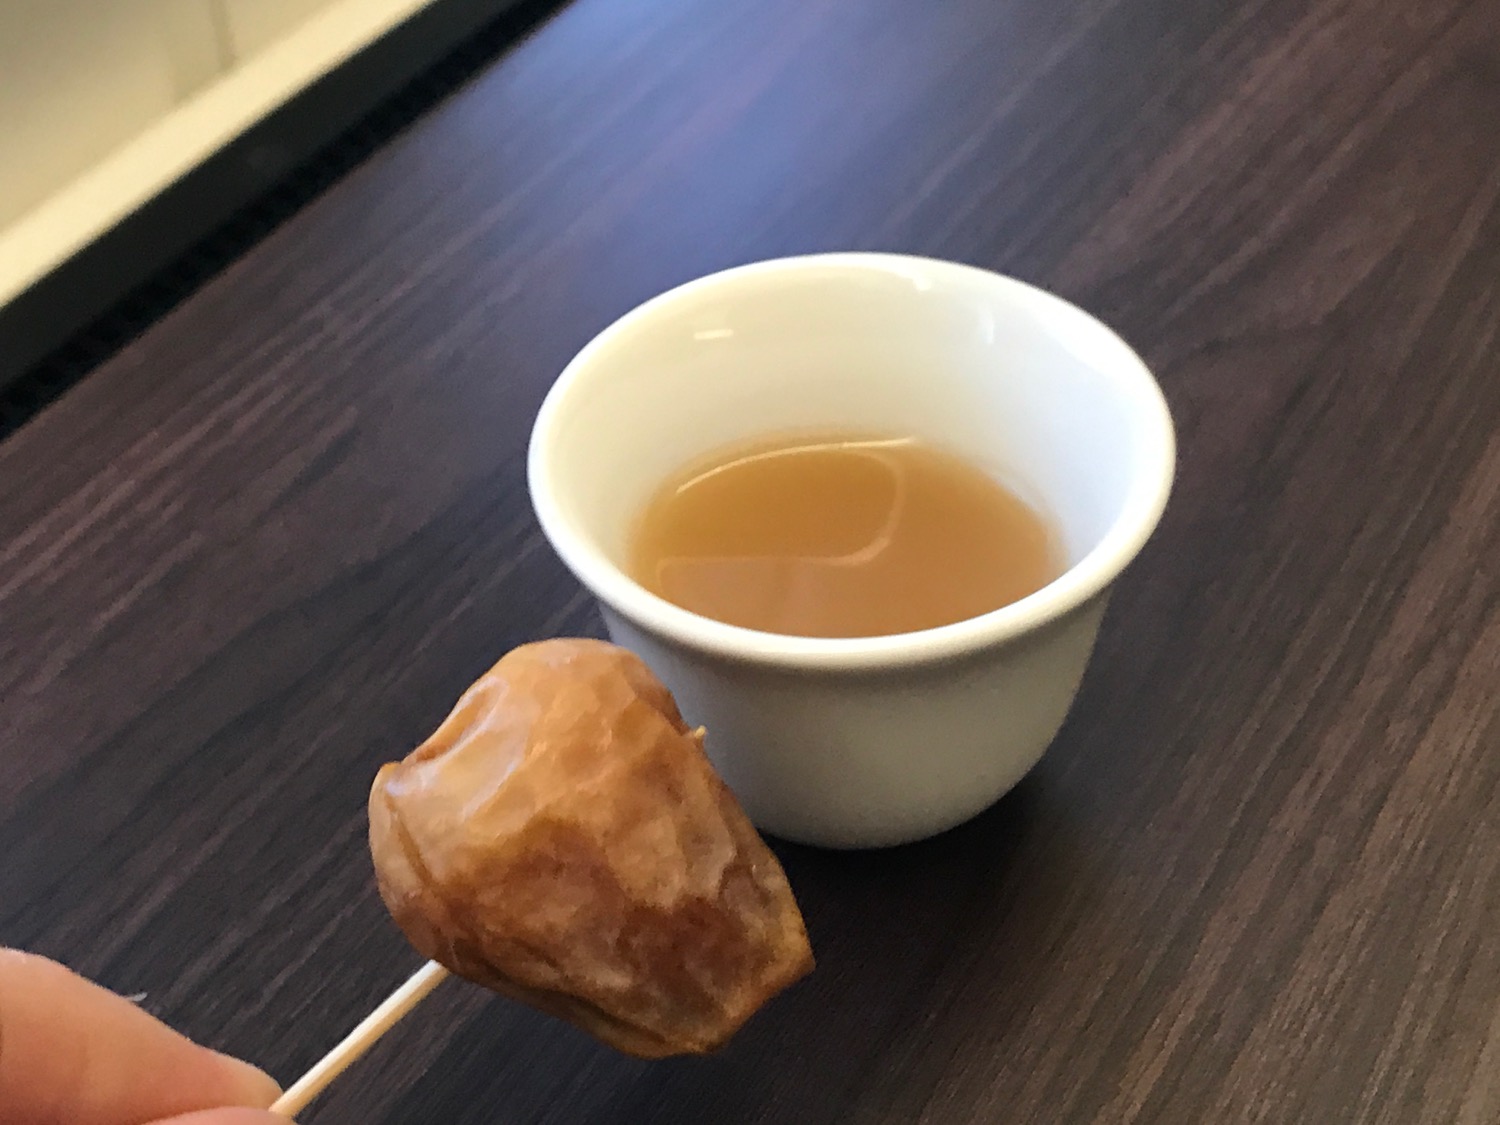 Hand holding a stick with food on a stick next to a cup with liquid